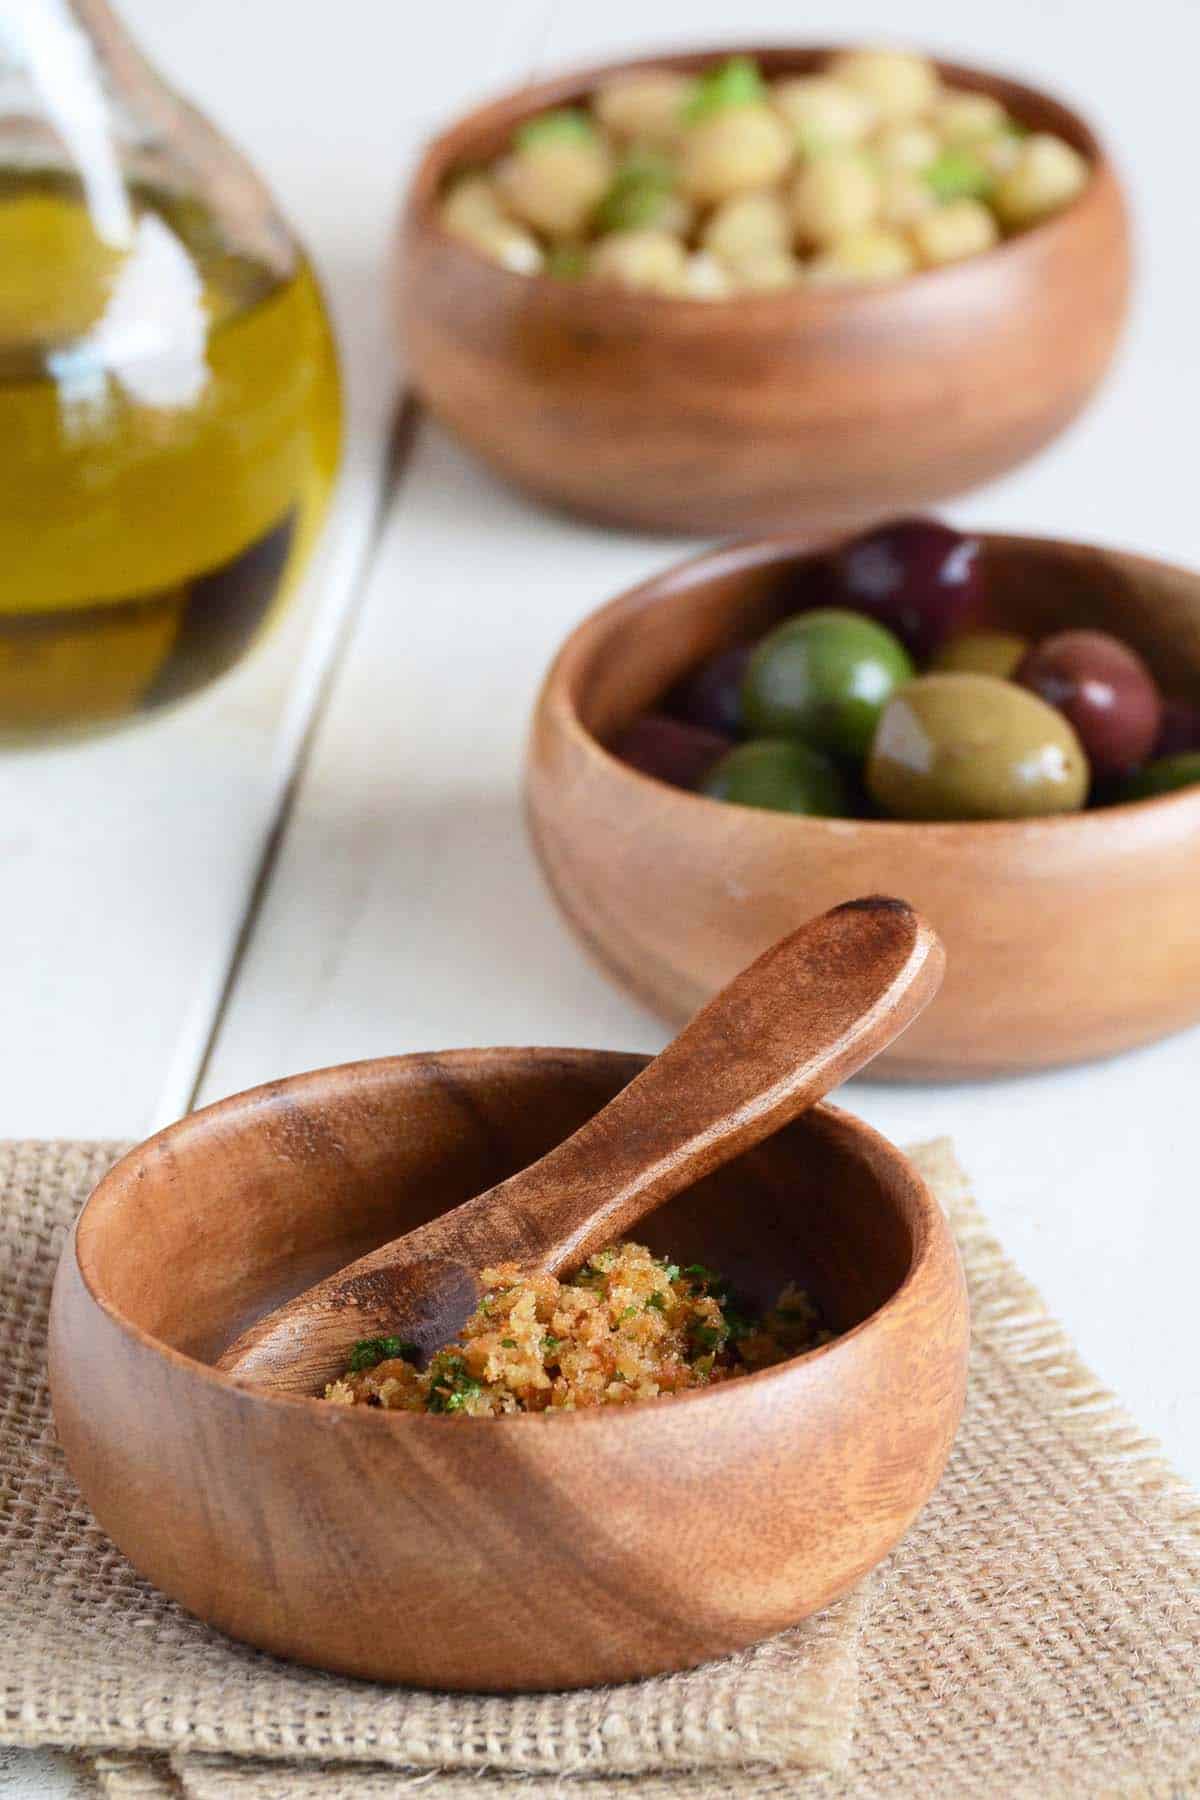 bread crumbs olives and chickpeas in wooden bowls